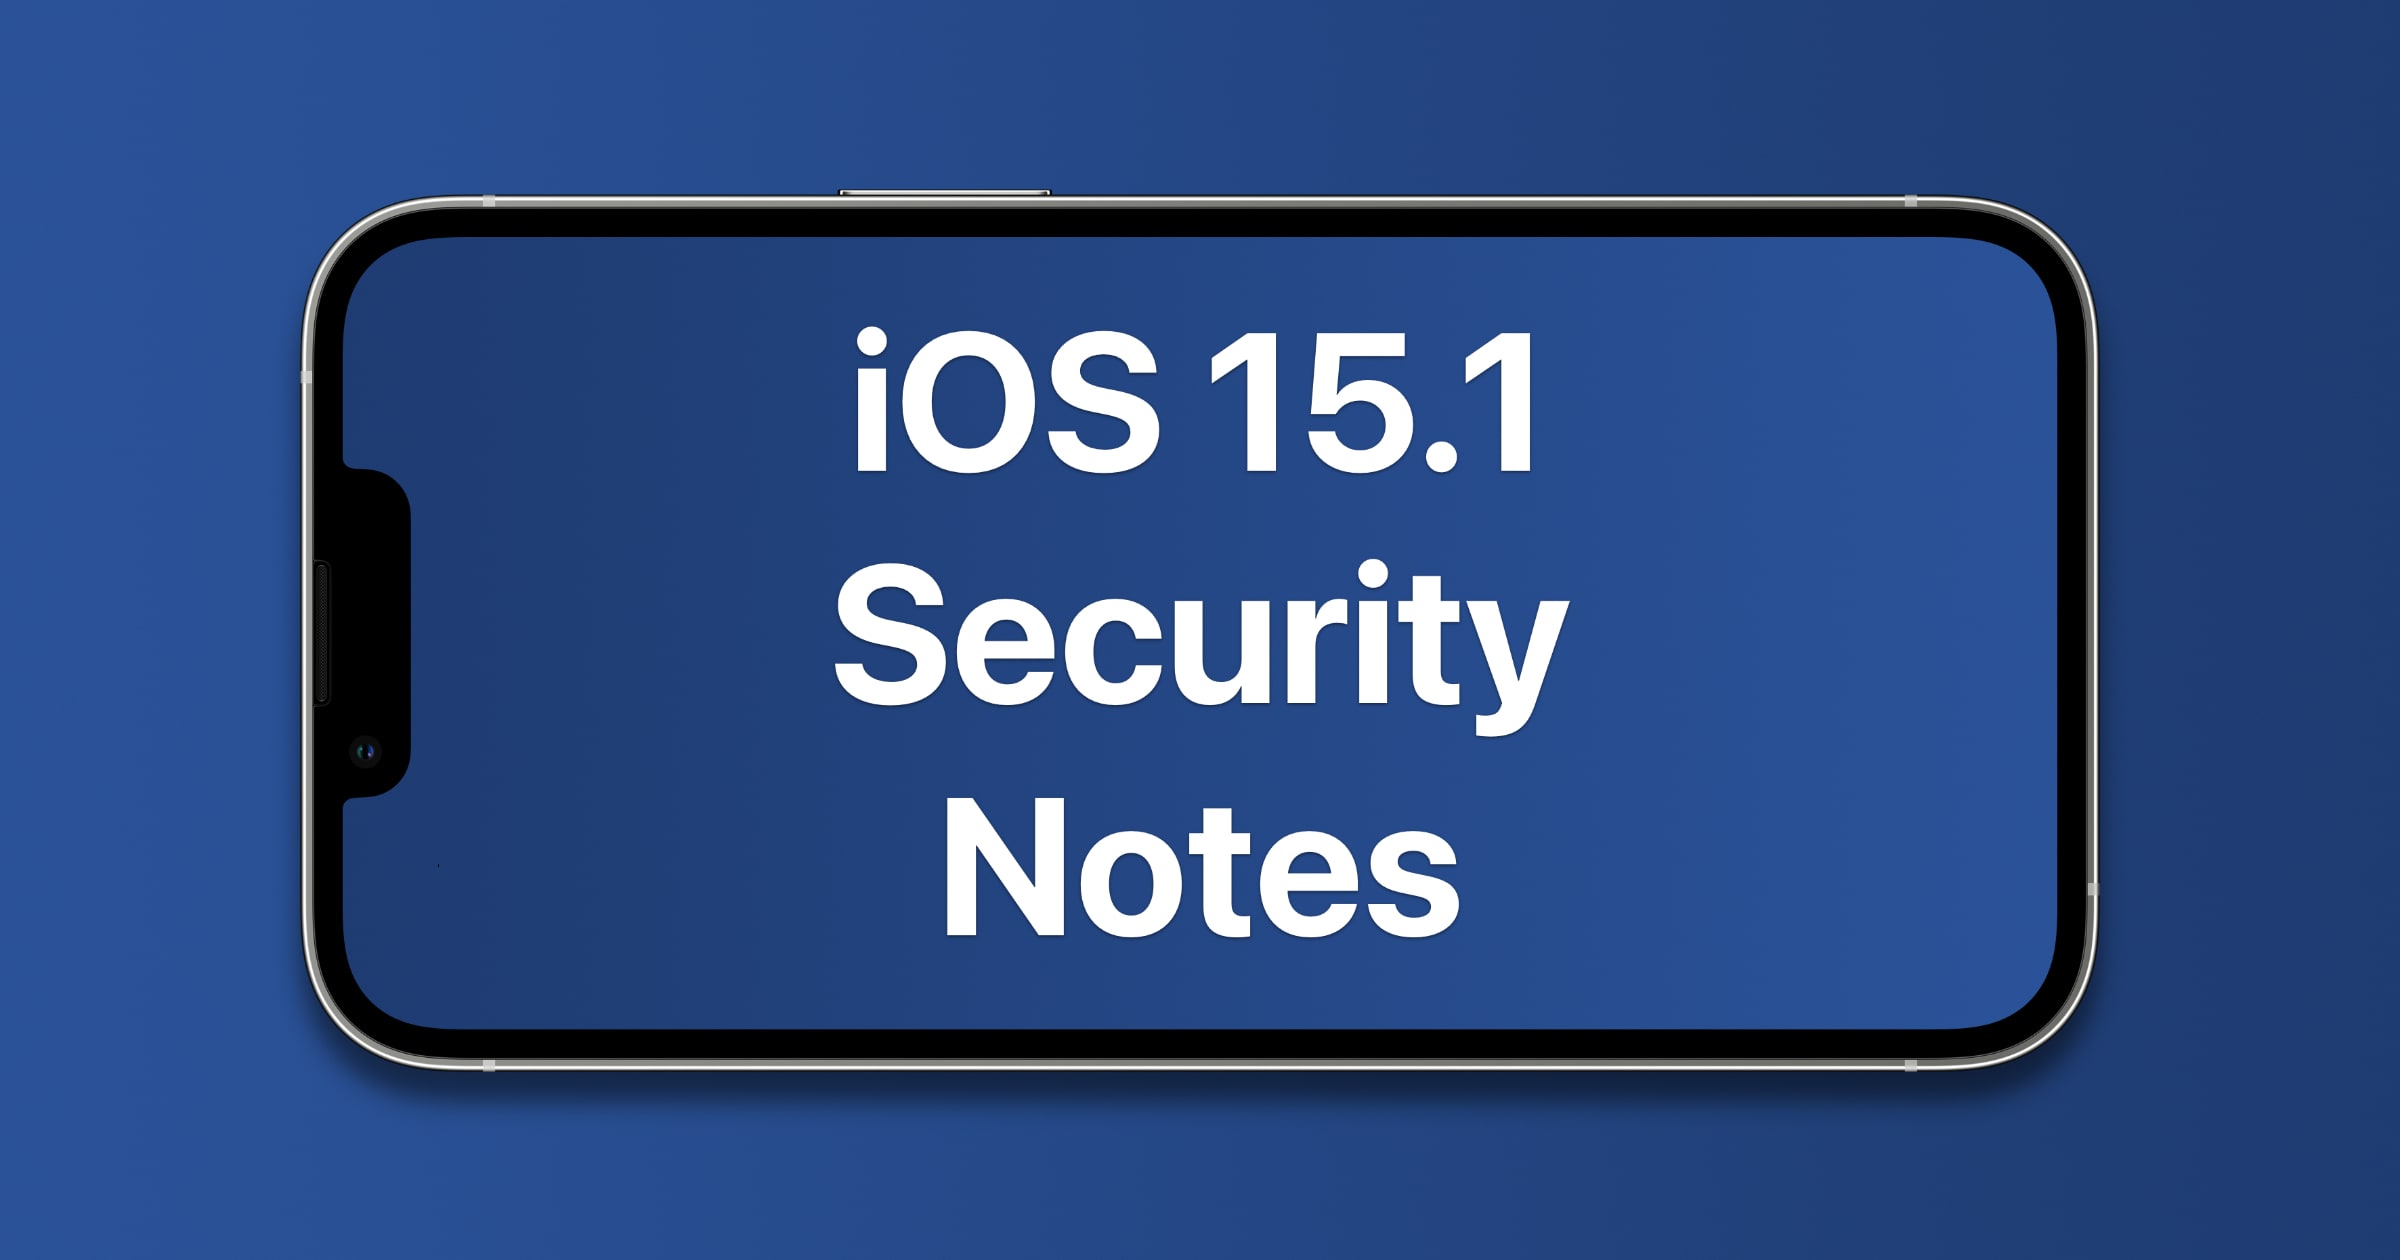 iOS 15.1 security notes